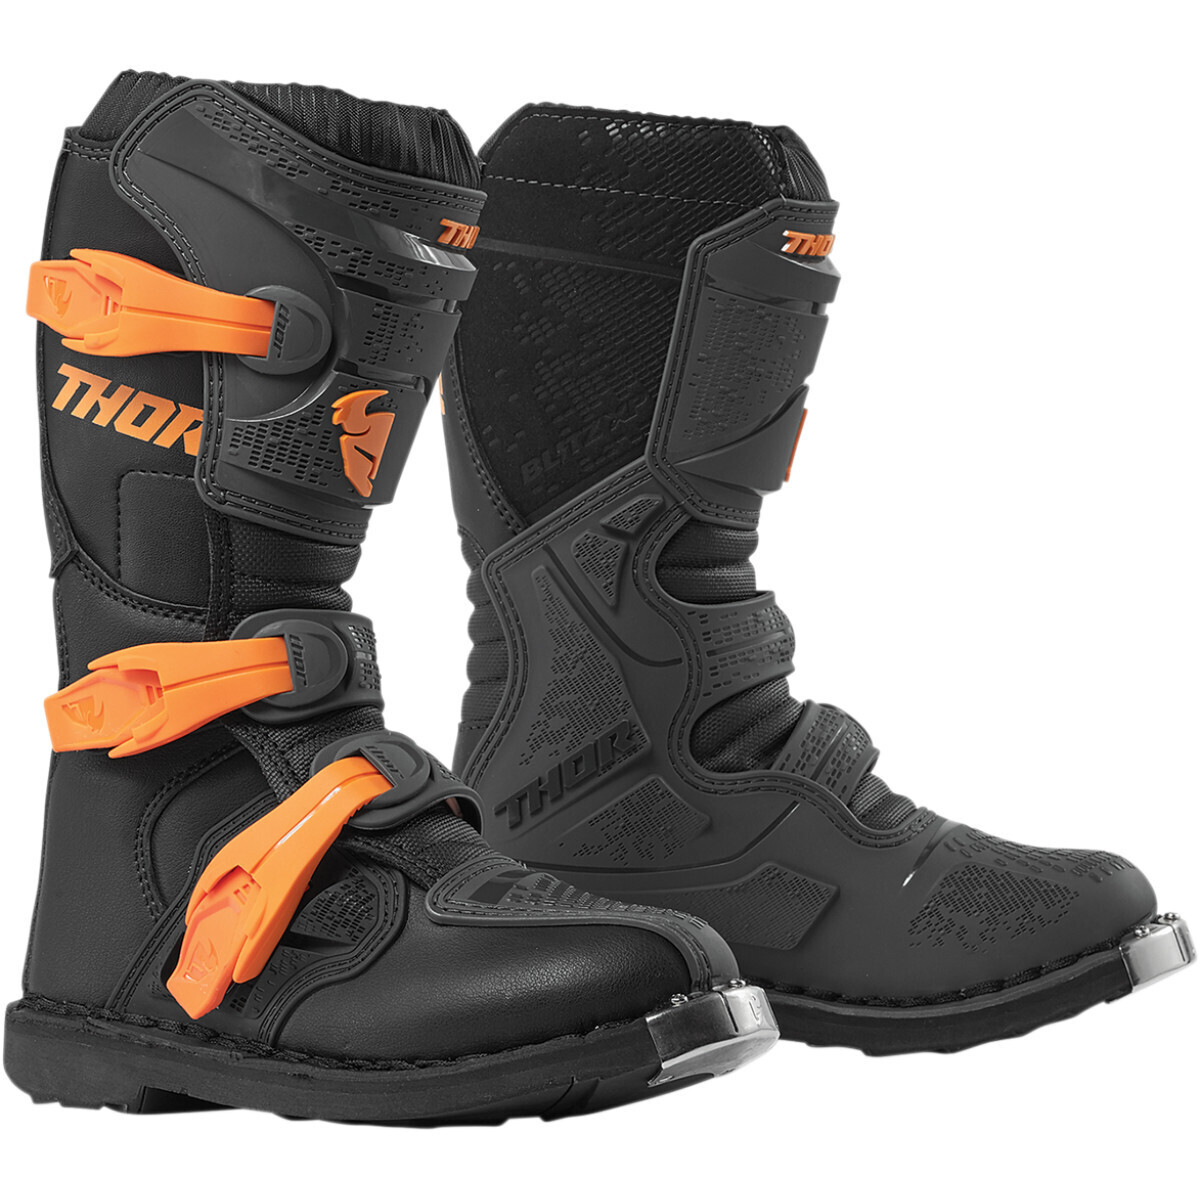 THOR
YOUTH BLITZ XP S9Y OFFROAD BOOTS CHARCOAL/ORANGE